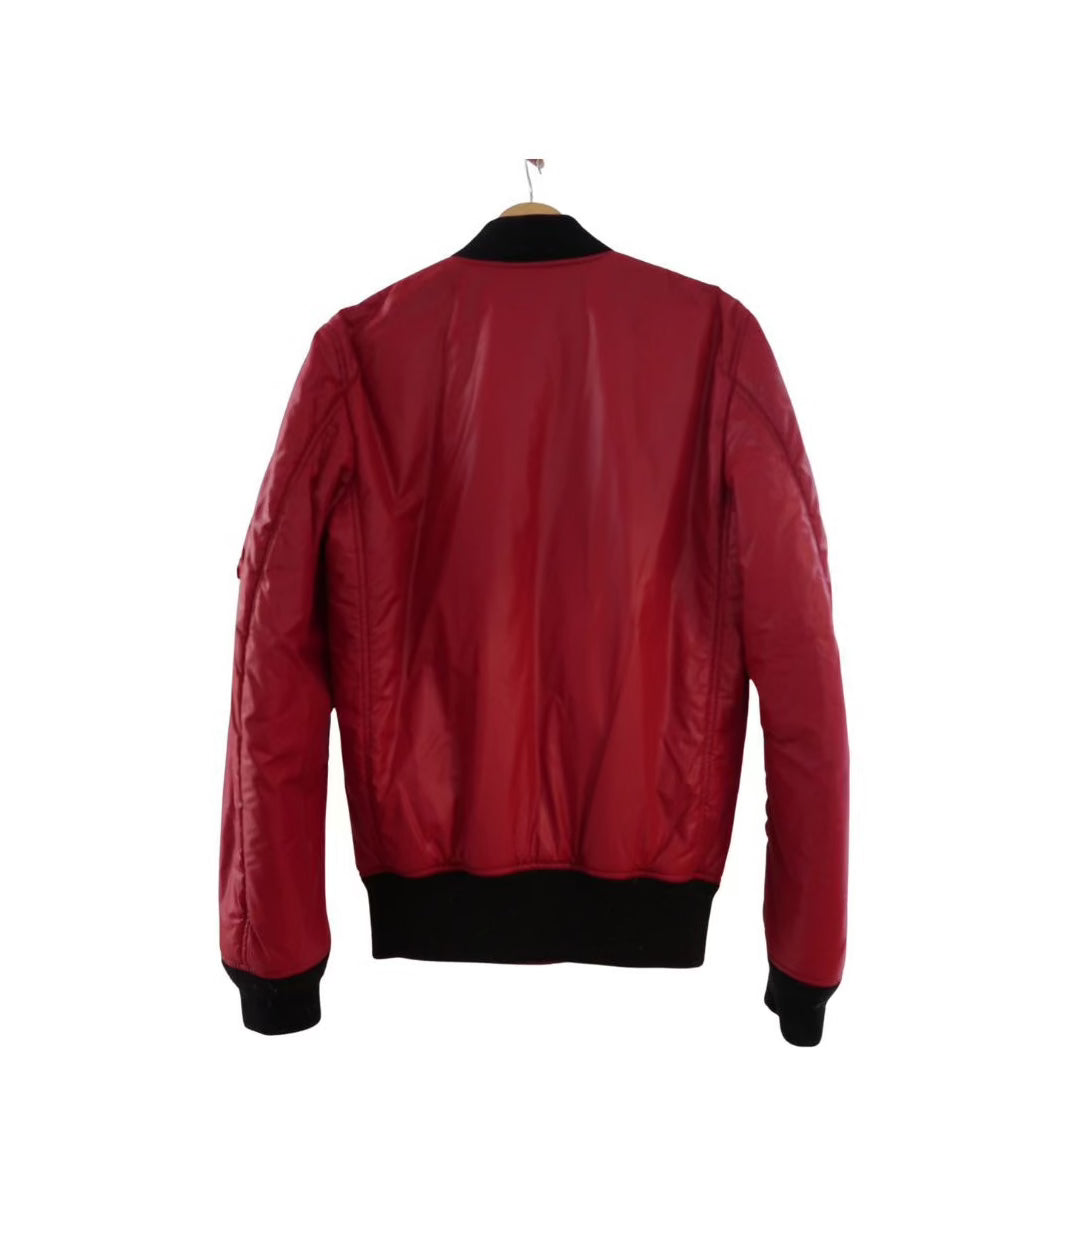 Dolce and Gabbana Red Bomber Jacket